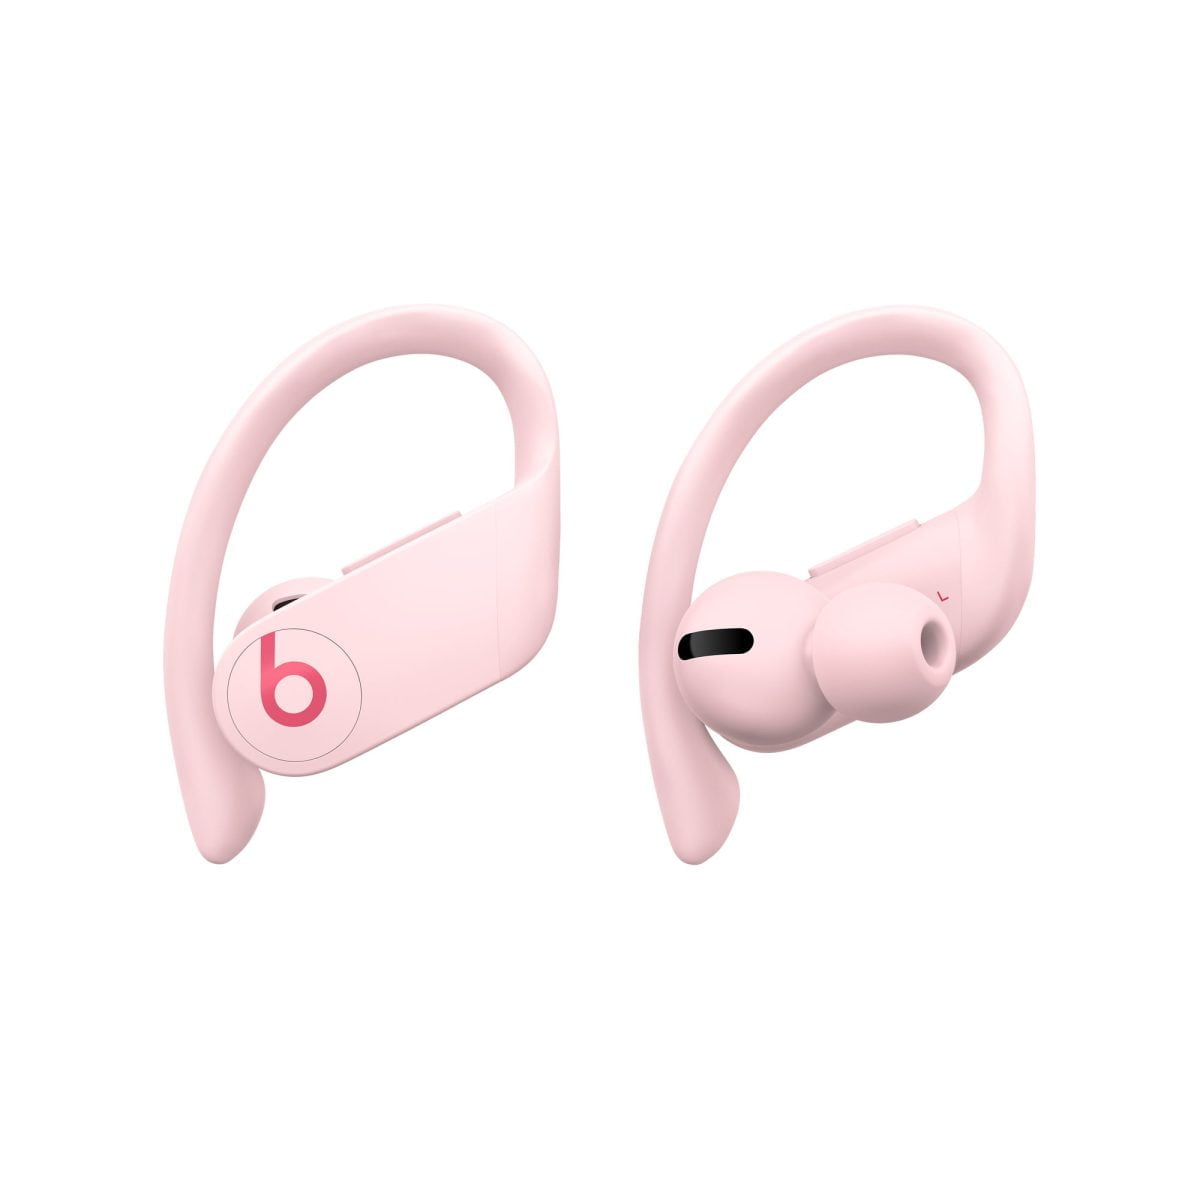 Mxy72 Apple &Lt;H1&Gt;&Lt;Span Class=&Quot;Pdp-Lrg-Header Rte-Plg-El&Quot;&Gt;Powerbeats Pro&Lt;/Span&Gt;&Lt;/H1&Gt; Powerbeats Pro, Powered By The Apple H1 Headphone Chip, Will Revolutionize The Way You Work Out. Built For Elite Athletes, These Totally Wireless Earphones Have No Wires To Hold You Back. The Adjustable, Secure-Fit Earhooks Are Customizable With Multiple Eartip Options For Extended Comfort And Are Made To Stay In Place, No Matter How Hard You Go. This Lightweight Earphone Is Built For Performance With A Reinforced Design For Ipx4-Rated Sweat And Water Resistance So You Can Take Your Workouts To The Next Level. With Up To 9 Hours Of Listening Time In Each Earbud And Powerful, Balanced Sound, You’ll Always Have Your Music To Motivate You. [Video Width=&Quot;1280&Quot; Height=&Quot;720&Quot; M4V=&Quot;Https://Lablaab.com/Wp-Content/Uploads/2020/10/Powerbeats-Pro-Totally-Wireless-Earphones-Black-Education-Apple-Ca.m4V&Quot;][/Video] &Lt;H2&Gt;&Lt;Span Style=&Quot;Color: #1B1919;Font-Size: 24Px&Quot;&Gt;Made For Movement&Lt;/Span&Gt;&Lt;/H2&Gt; &Lt;Div&Gt; &Lt;Span Class=&Quot;Pdp-Lrg-Body Rte-Plg-El&Quot;&Gt;Adjustable, Secure-Fit Earhooks Stay In Place With Multiple Eartip Options, And Are Made To Move With You, No Matter Where You Go.&Lt;/Span&Gt; &Lt;/Div&Gt; &Lt;Div&Gt; &Lt;H2&Gt;&Lt;Span Class=&Quot;Pdp-Lrg-Body Rte-Plg-El&Quot;&Gt;Sweat &Amp; Water-Resistant&Lt;/Span&Gt;&Lt;/H2&Gt; &Lt;Span Class=&Quot;Pdp-Lrg-Body Rte-Plg-El&Quot;&Gt;Reinforced Design For Sweat And Water Resistance Help You Make It Through Whatever Your Day Brings.&Lt;/Span&Gt; &Lt;/Div&Gt; &Lt;Div&Gt; &Lt;H2&Gt;&Lt;Span Class=&Quot;Pdp-Lrg-Body Rte-Plg-El&Quot;&Gt;Up To 9 Hours Of Listening Time&Lt;/Span&Gt;&Lt;/H2&Gt; &Lt;Span Class=&Quot;Pdp-Lrg-Body Rte-Plg-El&Quot;&Gt;Get More Than 24 Hours Of Combined Playback With The Charging Case, And Use 5-Minute Fast Fuel For 1.5 Hours Of Playback When Battery Is Low&Lt;Sup&Gt;1&Lt;/Sup&Gt;.&Lt;/Span&Gt; &Lt;/Div&Gt; &Lt;Div&Gt; &Lt;H2&Gt;&Lt;Span Class=&Quot;Pdp-Lrg-Body Rte-Plg-El&Quot;&Gt;Play One Side Or Both&Lt;/Span&Gt;&Lt;/H2&Gt; &Lt;Span Class=&Quot;Pdp-Lrg-Body Rte-Plg-El&Quot;&Gt;Auto Play/Pause, Independent Earbud Connection Via The Apple H1 Chip, And Full Volume And Track Controls On Each Earbud Mean You’re In Charge Of How You Listen.&Lt;/Span&Gt; &Lt;/Div&Gt; &Lt;H3 Class=&Quot;Pdp-Detail-Title Pdp-Lrg-Body-B&Quot;&Gt;In The Box&Lt;/H3&Gt; &Lt;Div&Gt; &Lt;Ul Class=&Quot;Pdp-Lrg-Body&Quot;&Gt; &Lt;Li&Gt;Powerbeats Pro Totally Wireless Earphones&Lt;/Li&Gt; &Lt;Li&Gt;Charging Case&Lt;/Li&Gt; &Lt;Li&Gt;Eartips With Four Size Options&Lt;/Li&Gt; &Lt;Li&Gt;Lightning To Usb-A Charging Cable&Lt;/Li&Gt; &Lt;Li&Gt;Quick Start Guide&Lt;/Li&Gt; &Lt;Li&Gt;Warranty Card (One Year Manufacturer Warranty)&Lt;/Li&Gt; &Lt;/Ul&Gt; &Lt;/Div&Gt; Powerbeats Pro Powerbeats Pro In-Ear Wireless Headphones Beats By Dr. Dre - Cloud Pink